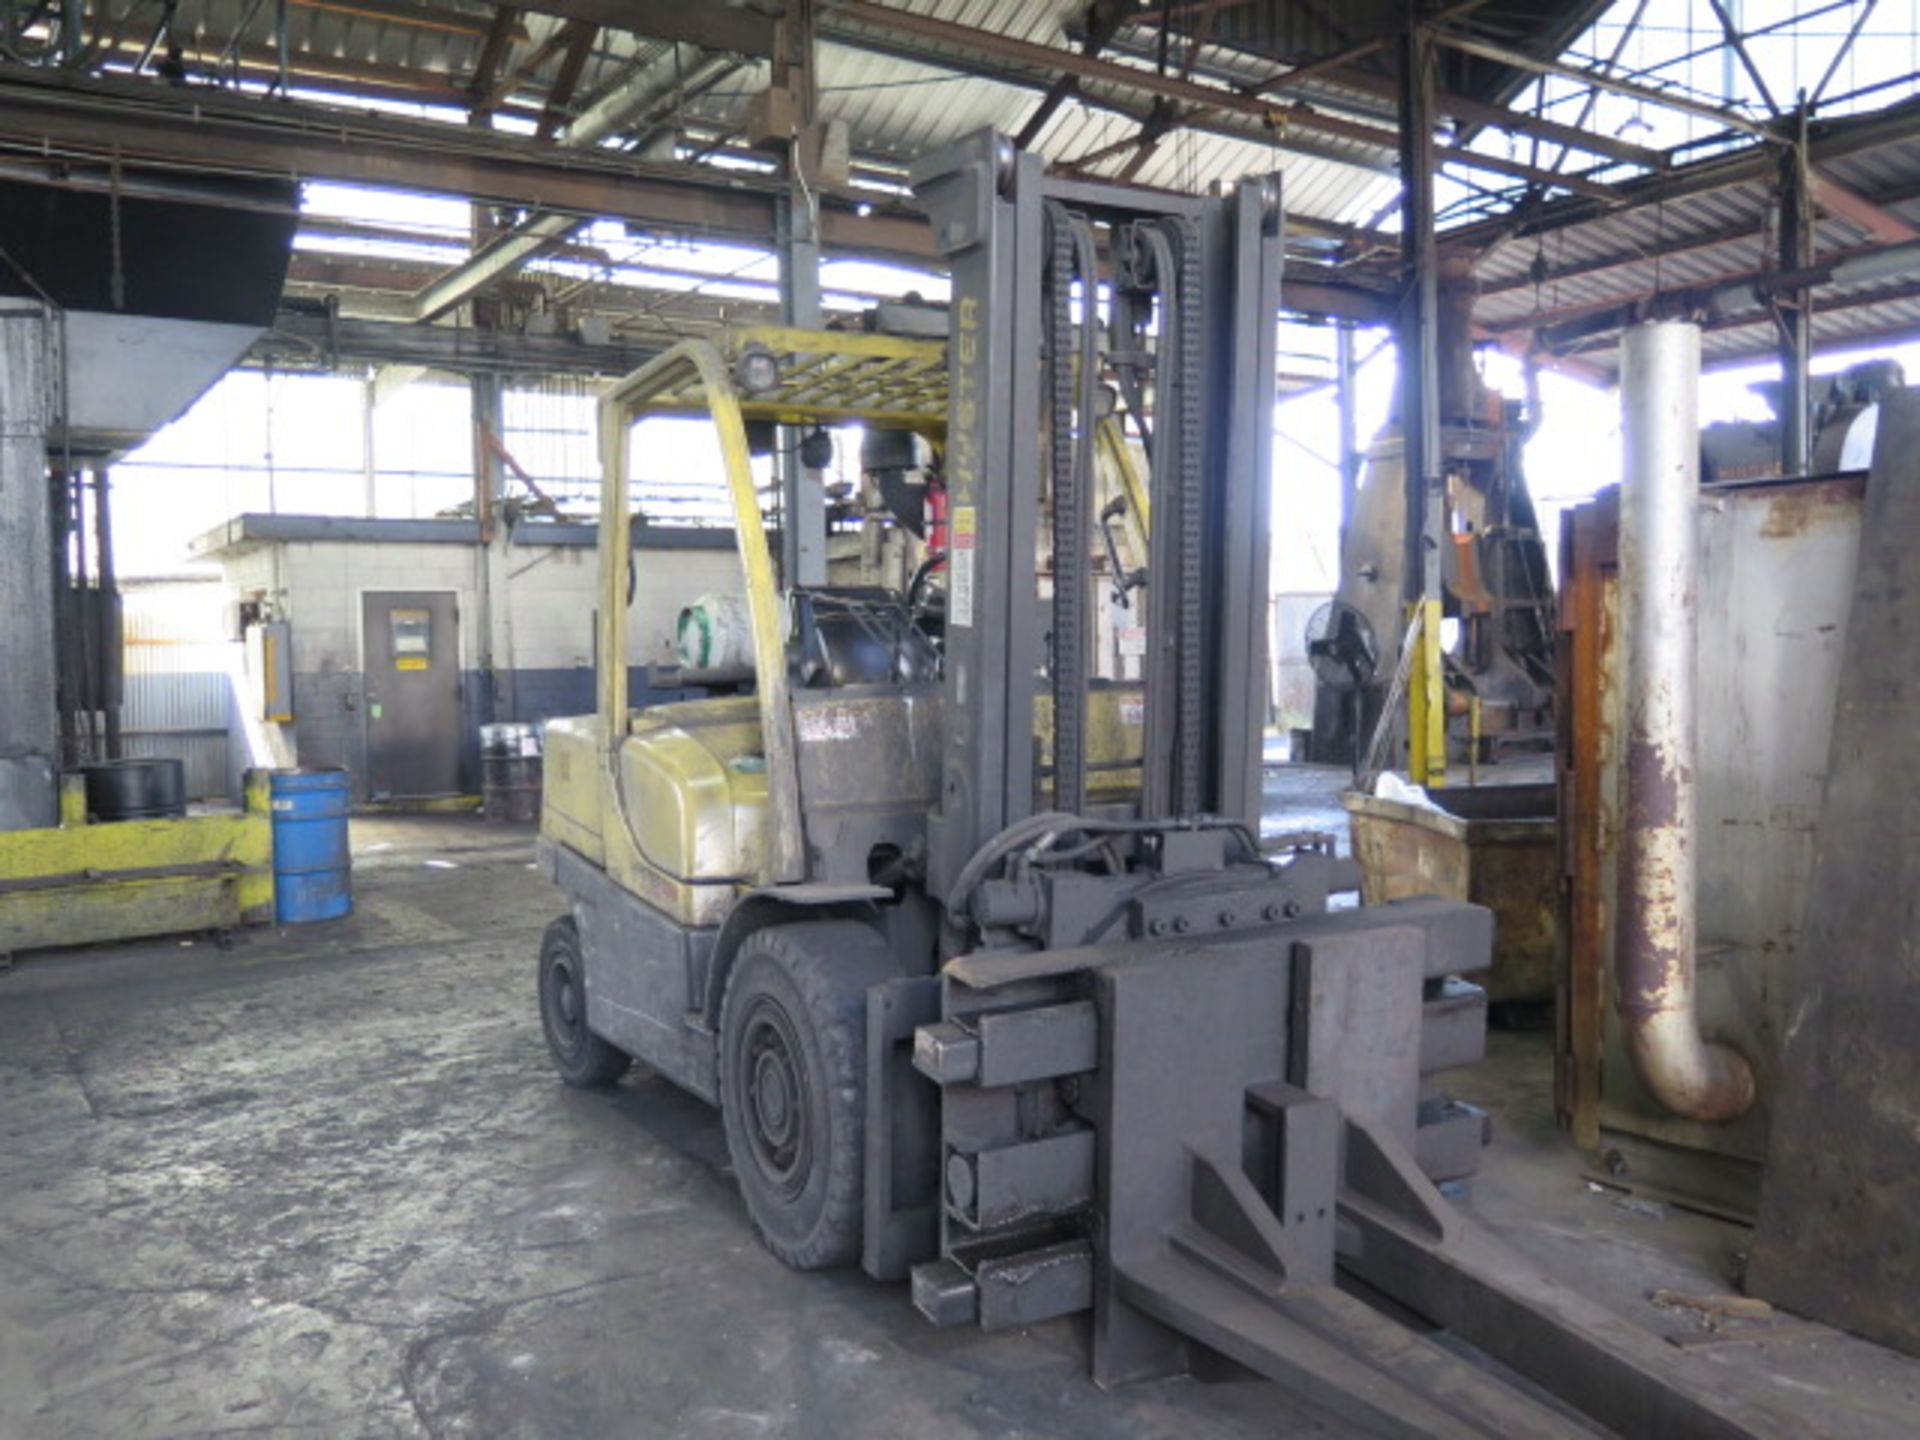 Hyster Fortis 100 H100F 10,500 Lb Cap LPG Forklift s/n S005V02681L w/ 2-Stage Mast, SOLD AS IS - Image 2 of 18